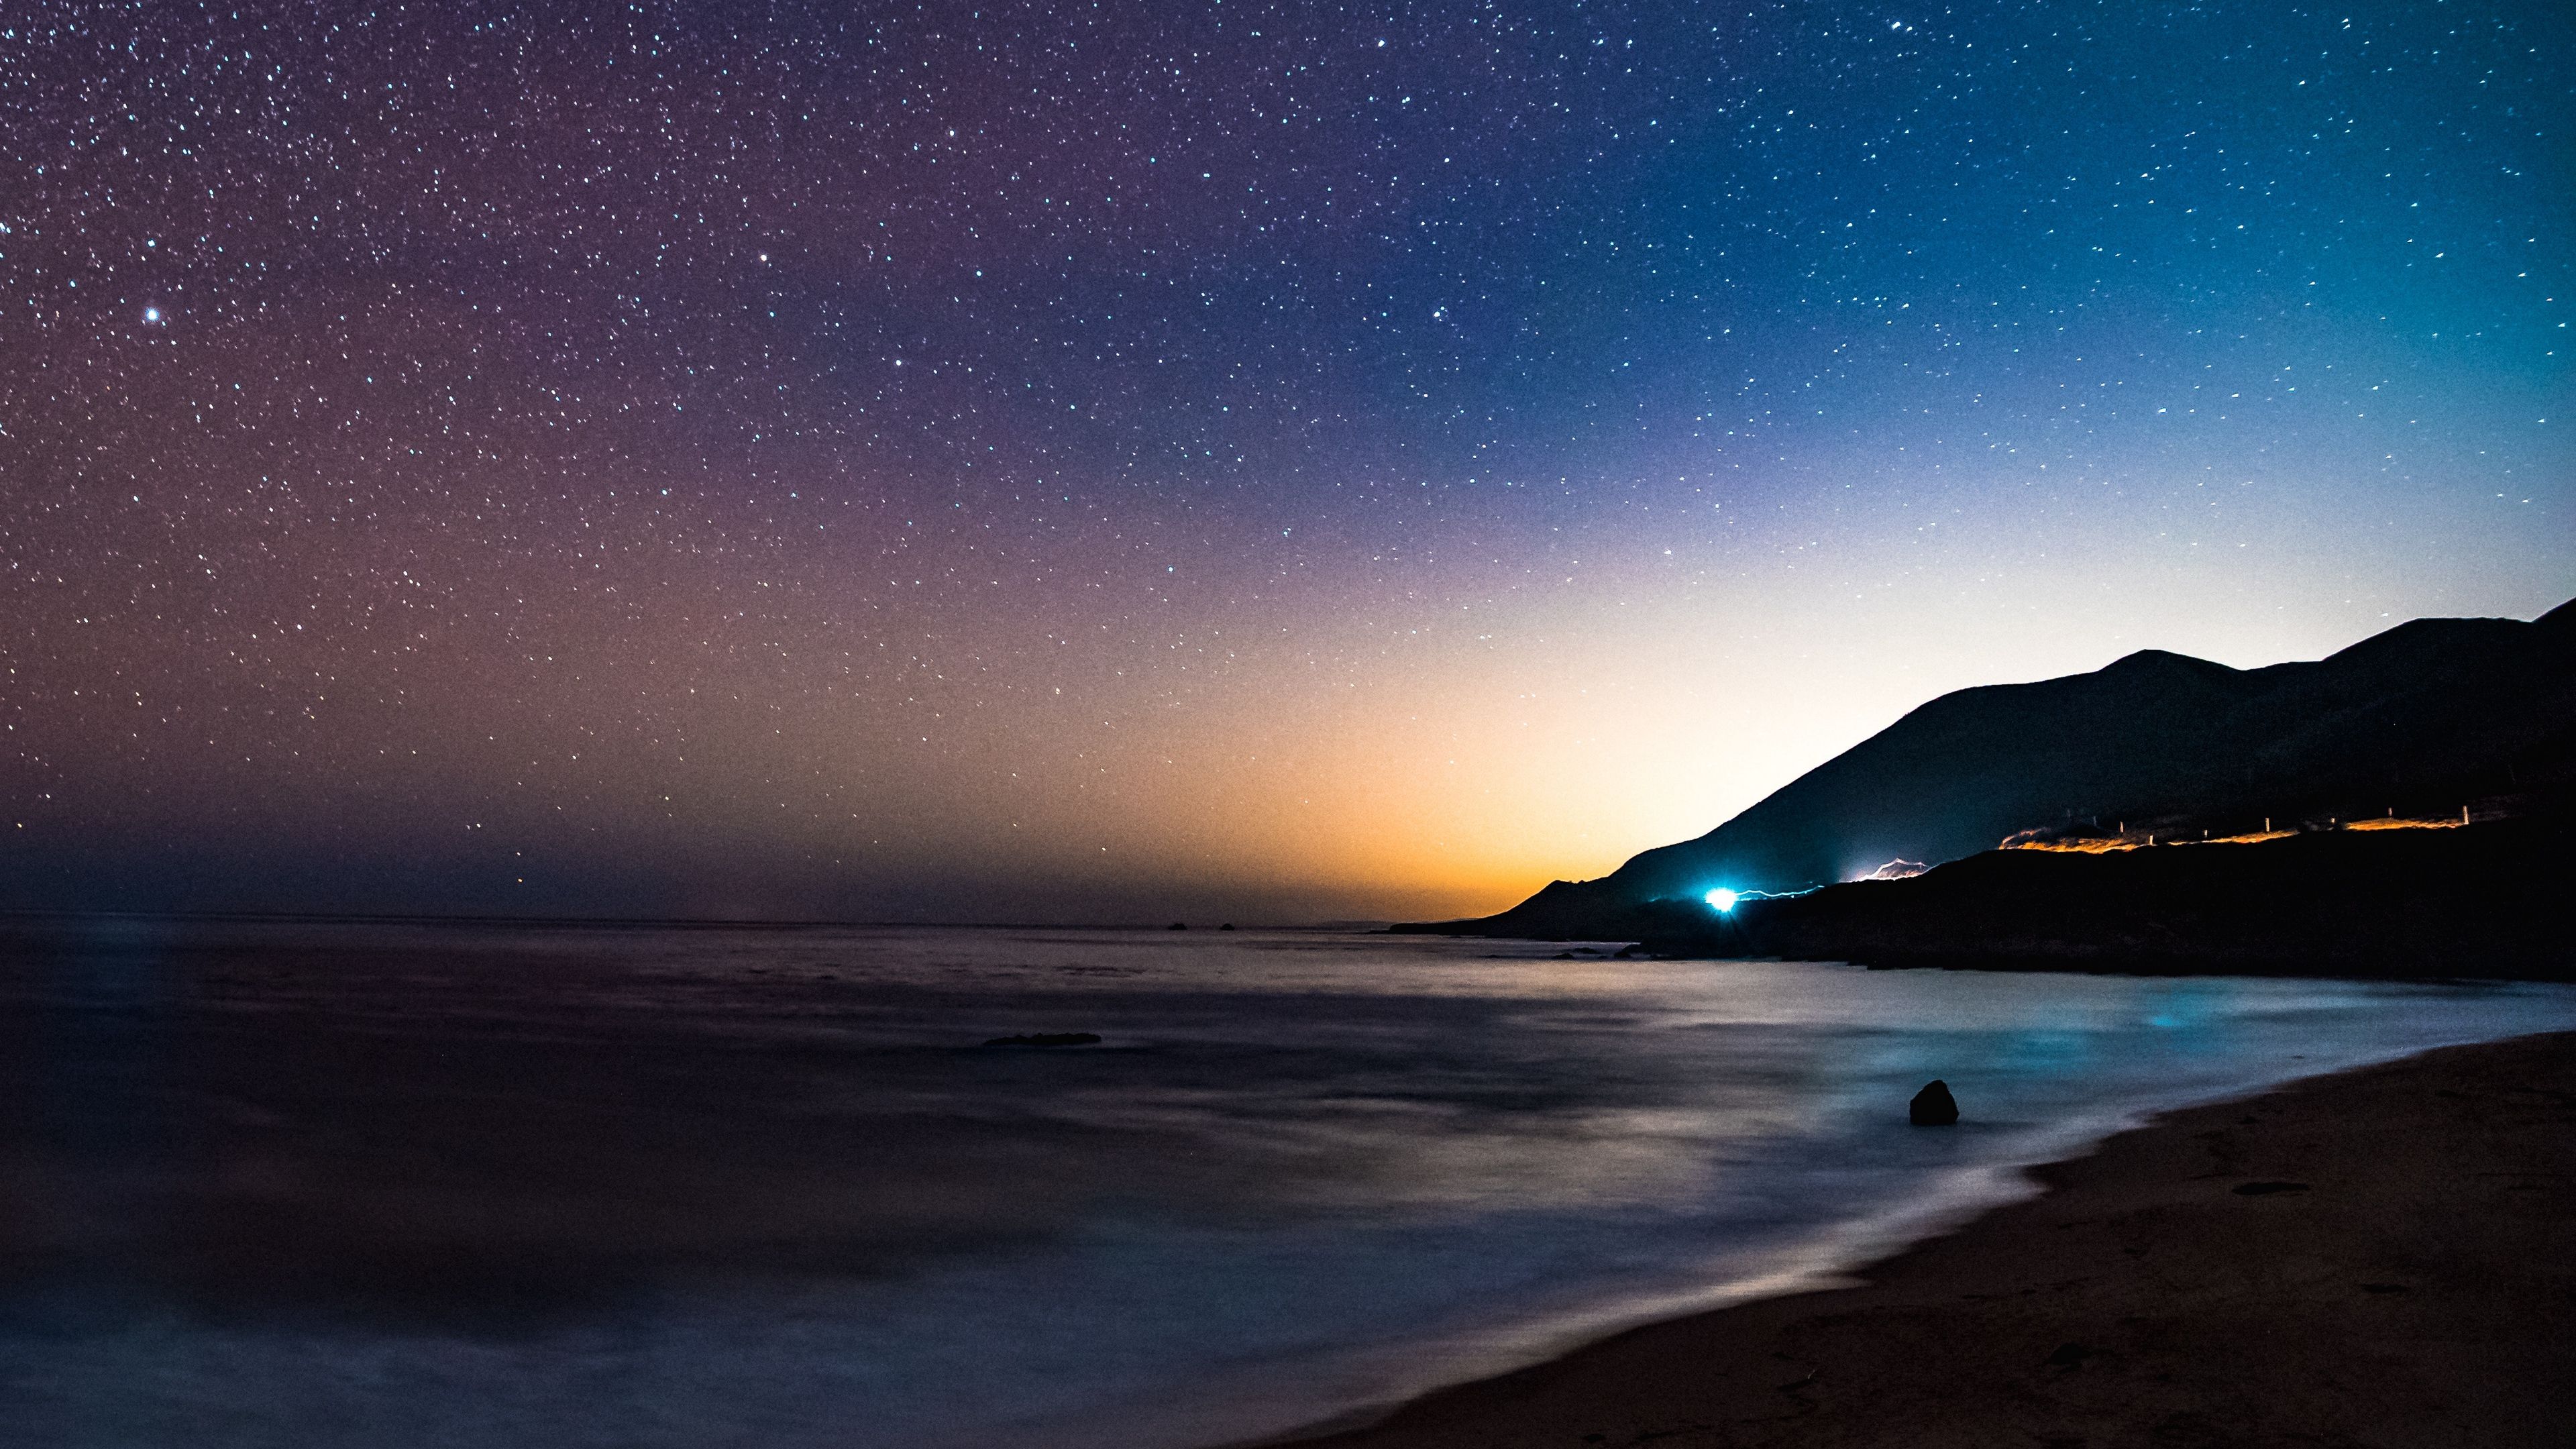 Download wallpaper 3840x2160 starry sky, mountains, night, sea